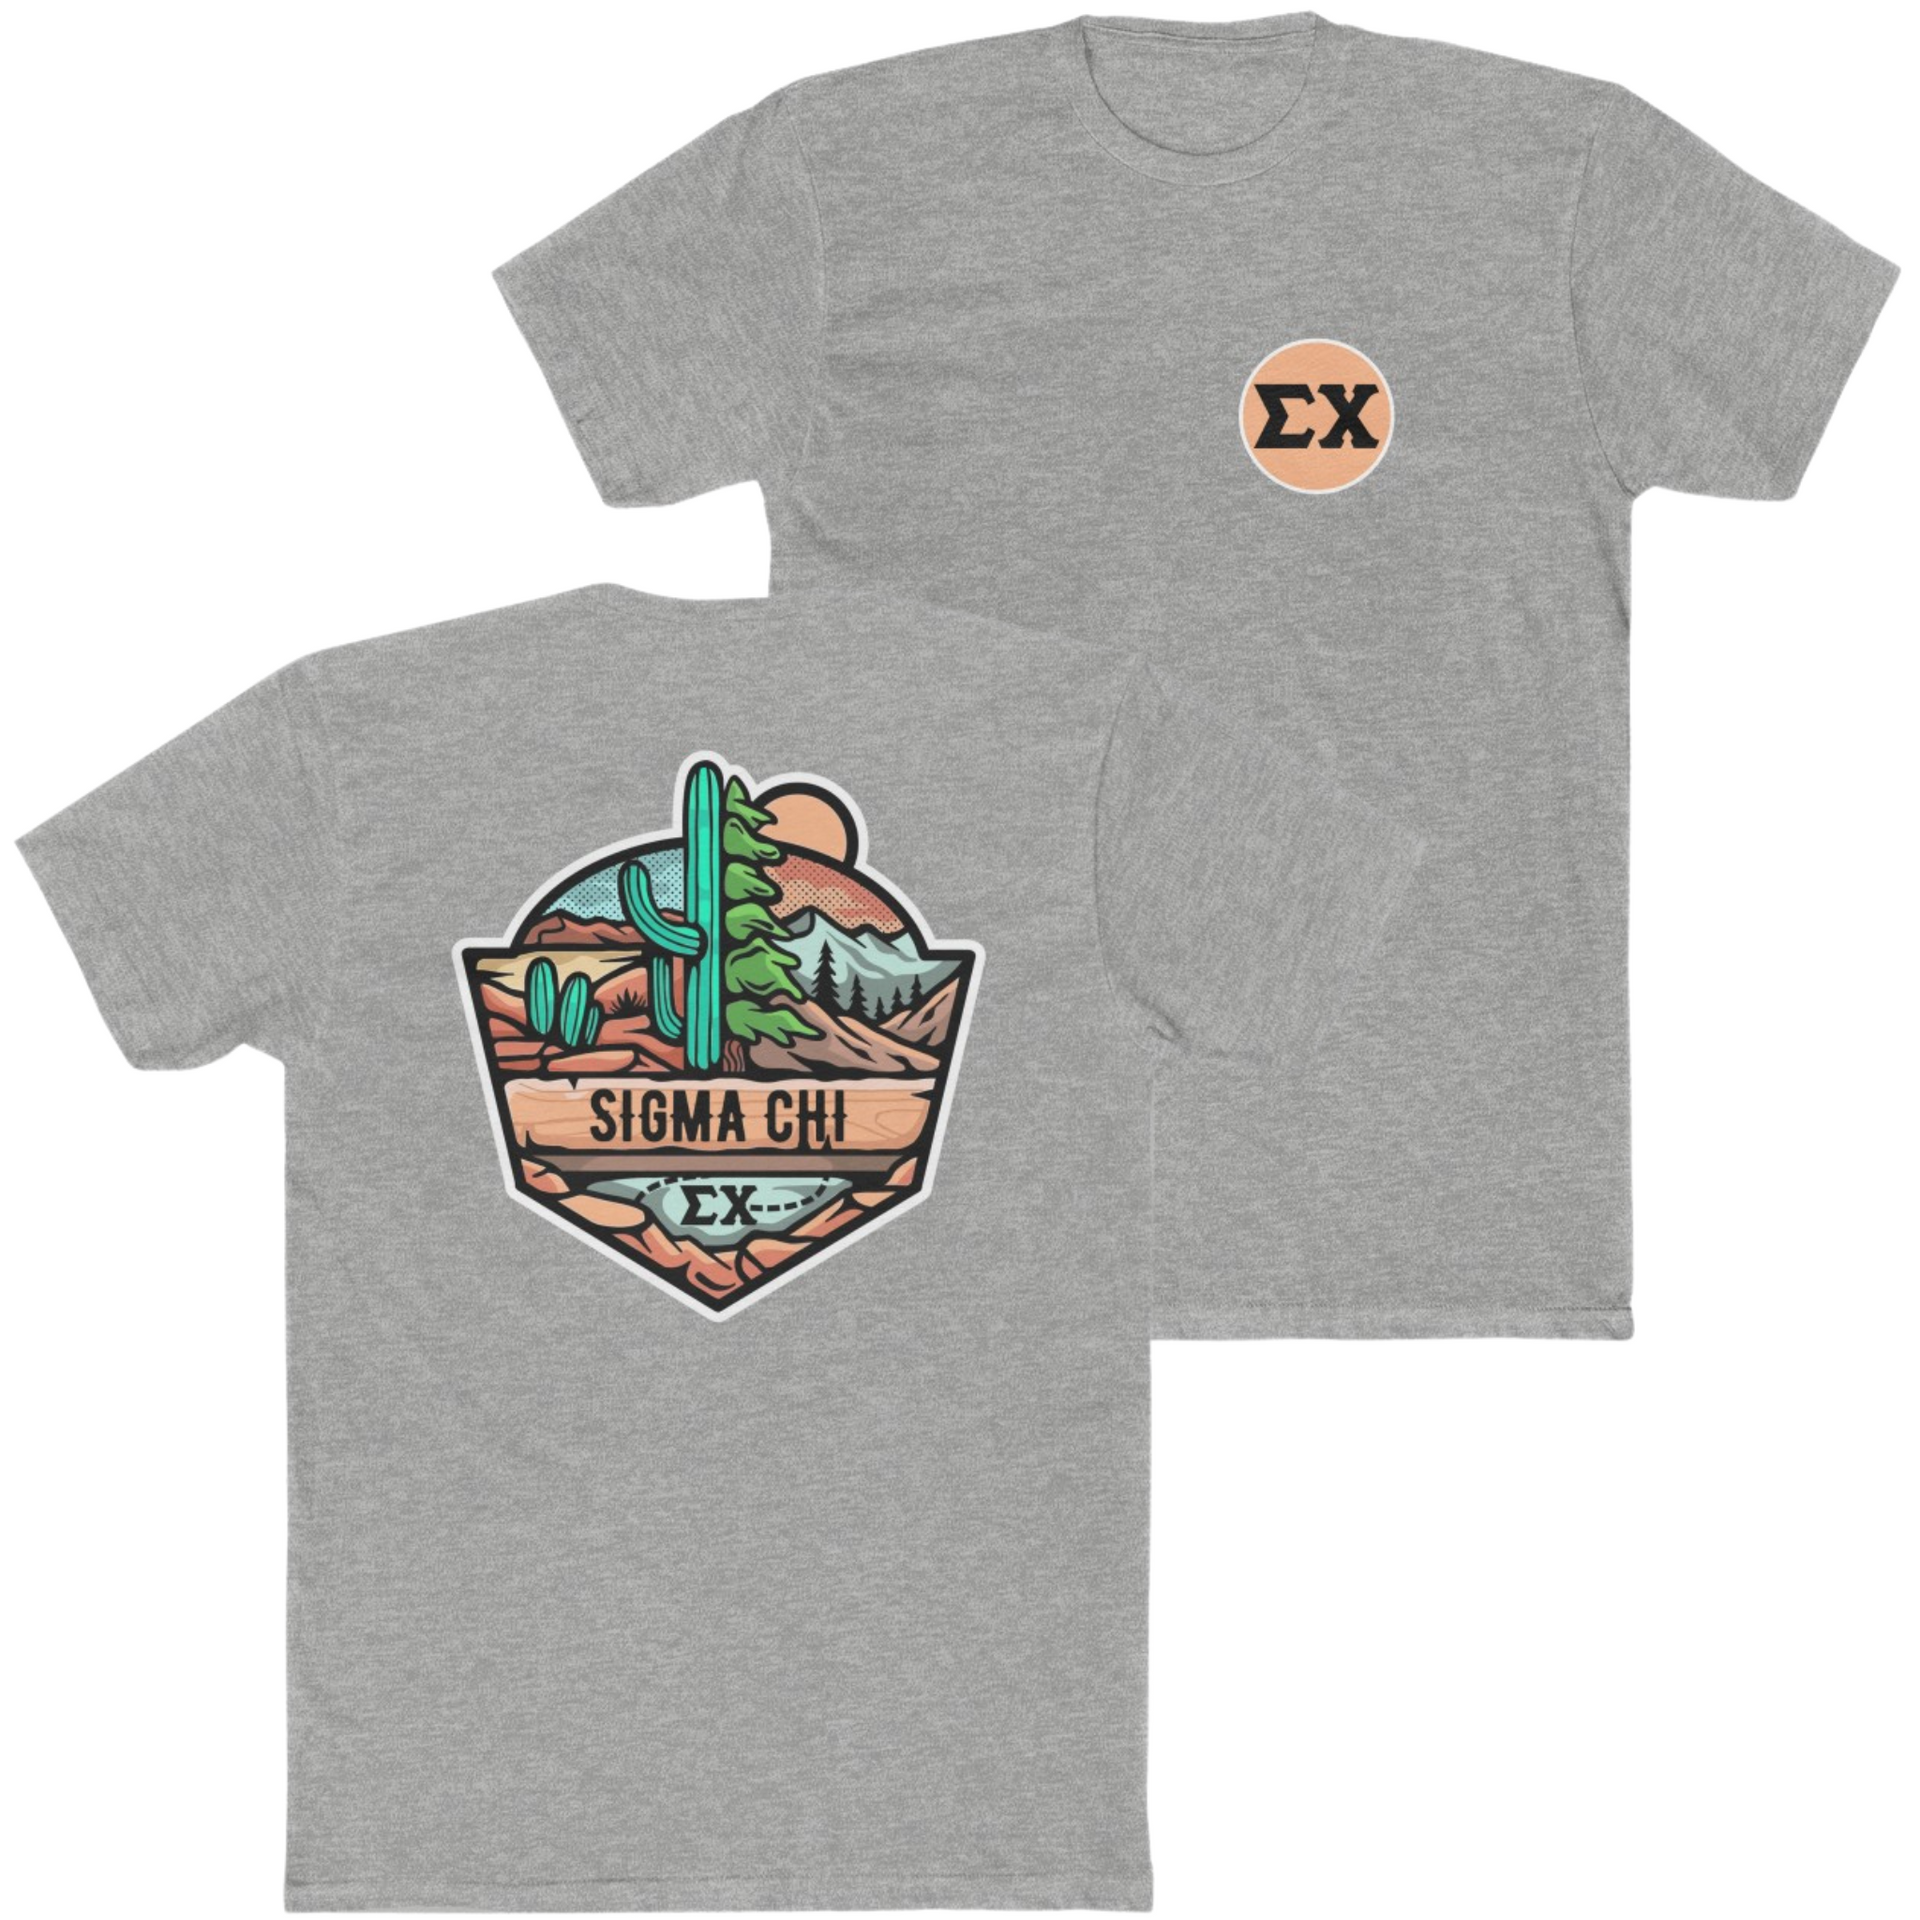 Grey Sigma Chi Graphic T-Shirt | Desert Mountains | Sigma Chi Fraternity Apparel